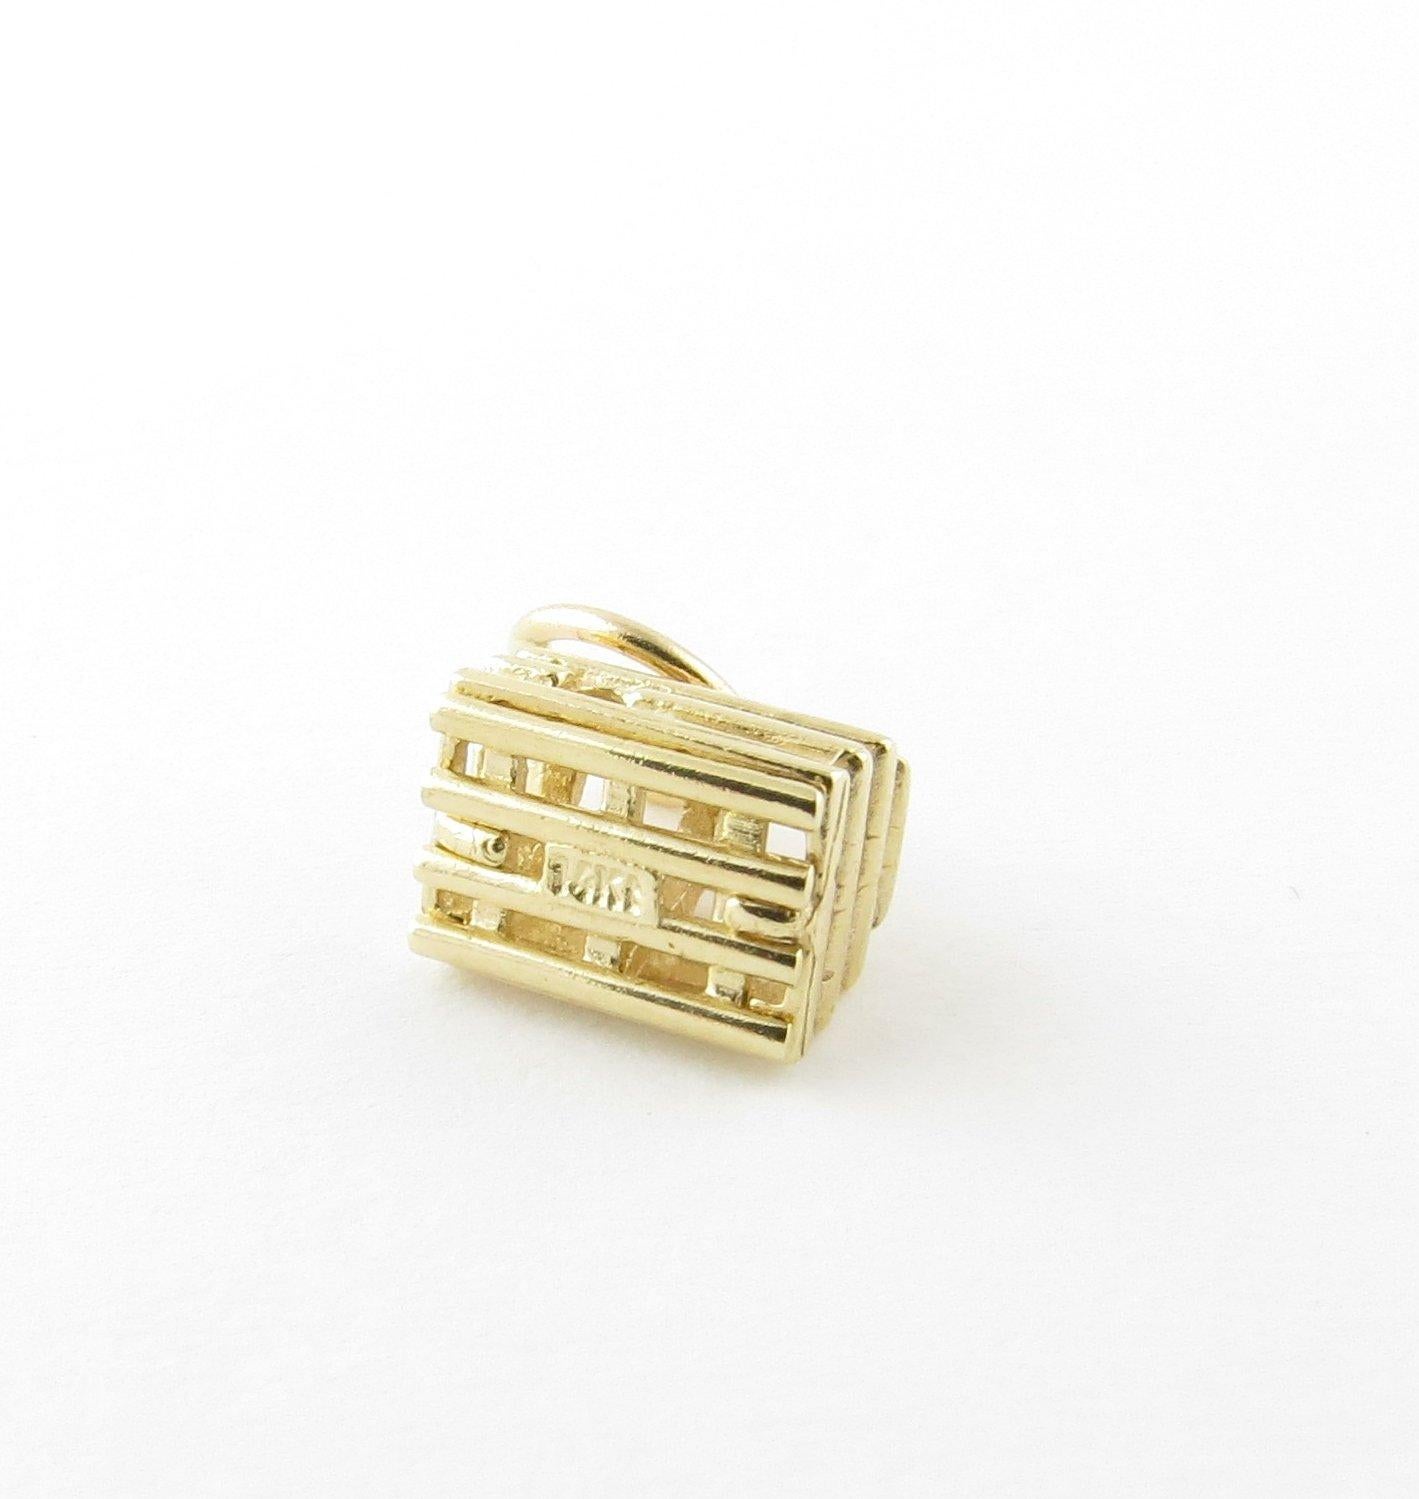 Vintage 14 Karat Yellow Gold Lobster Trap Charm. This lovely 3D charm features a miniature lobster trap meticulously detailed in 14K yellow gold.
Size: 8 mm x 8 mm (actual charm) Weight: 0.6 dwt. / 1.0 gr. Stamped: 14K Very good condition,